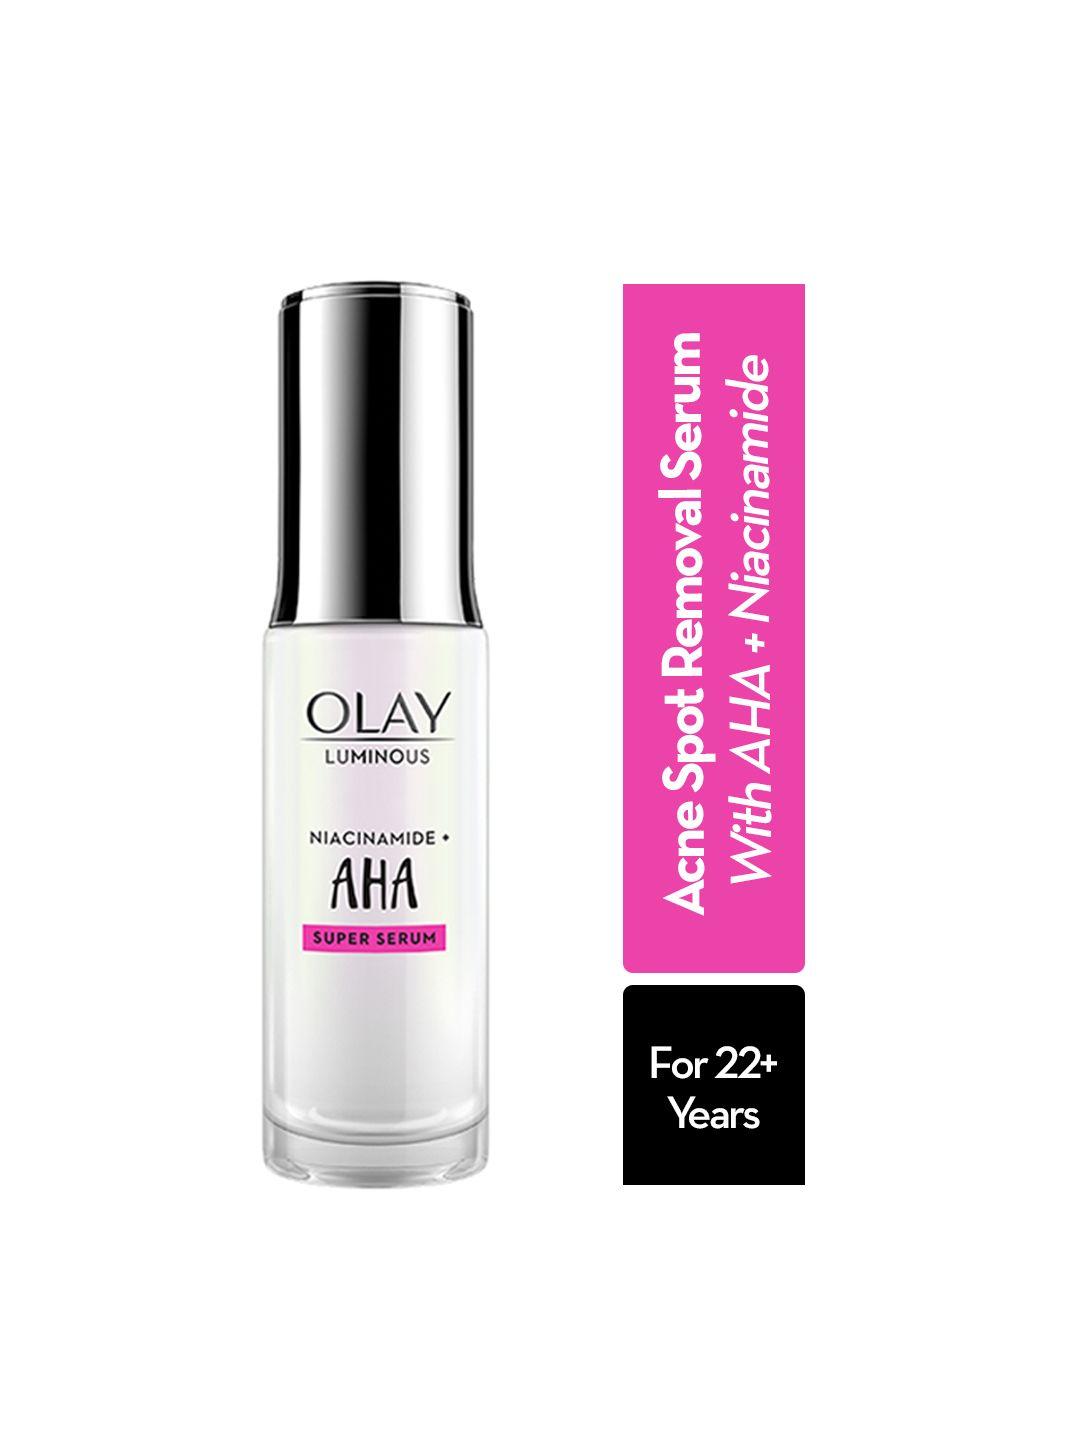 olay luminous acne spot removal super serum with aha & niacinamide for 22+ years - 30 ml